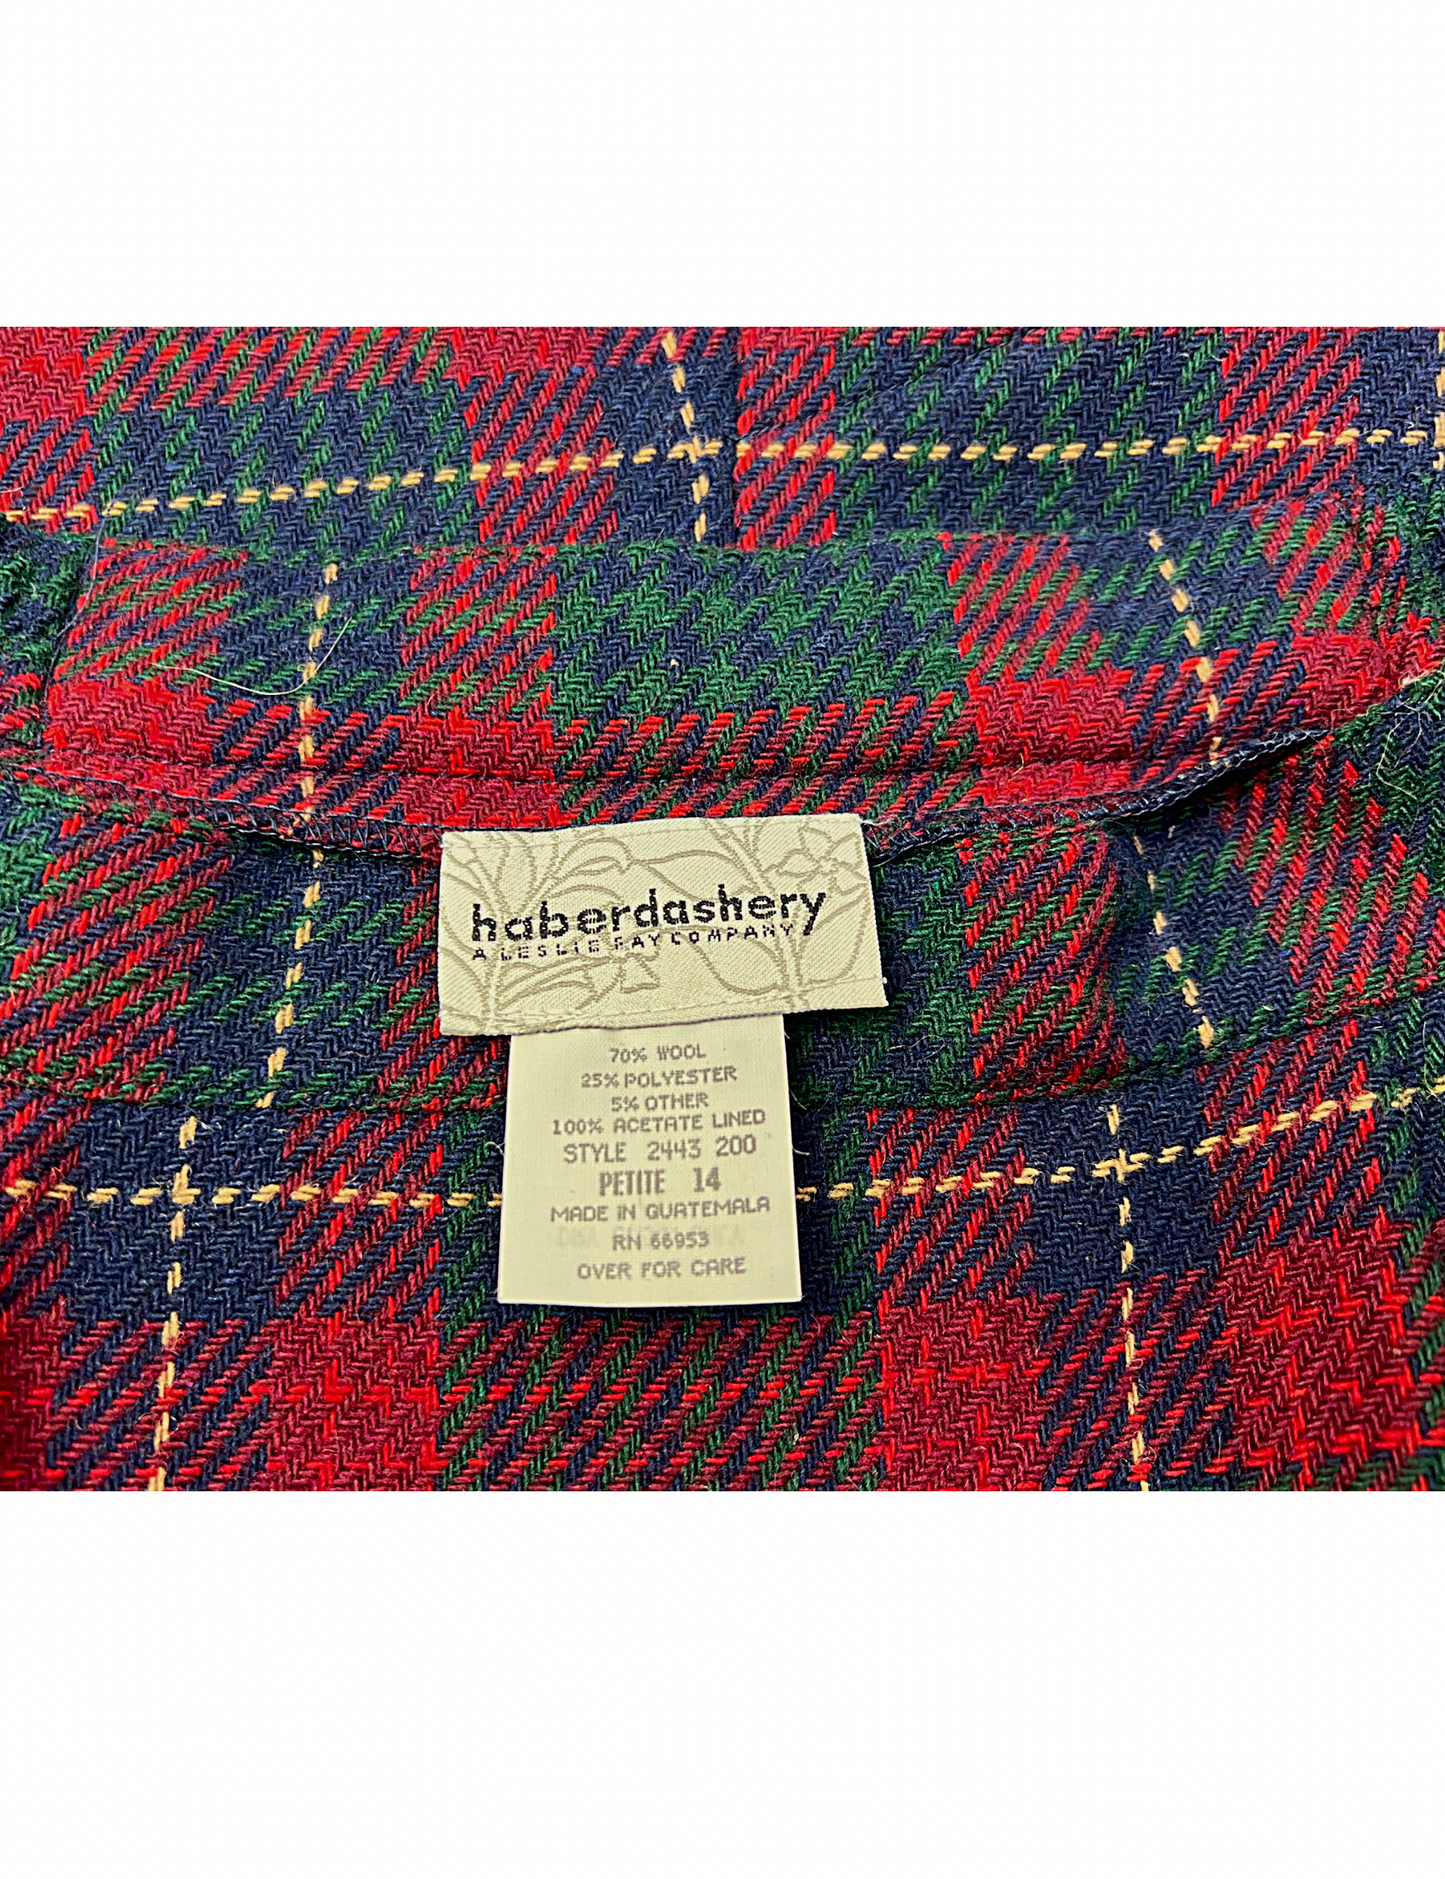 90’s Wool Plaid Pencil Skirt with Pockets Size 10